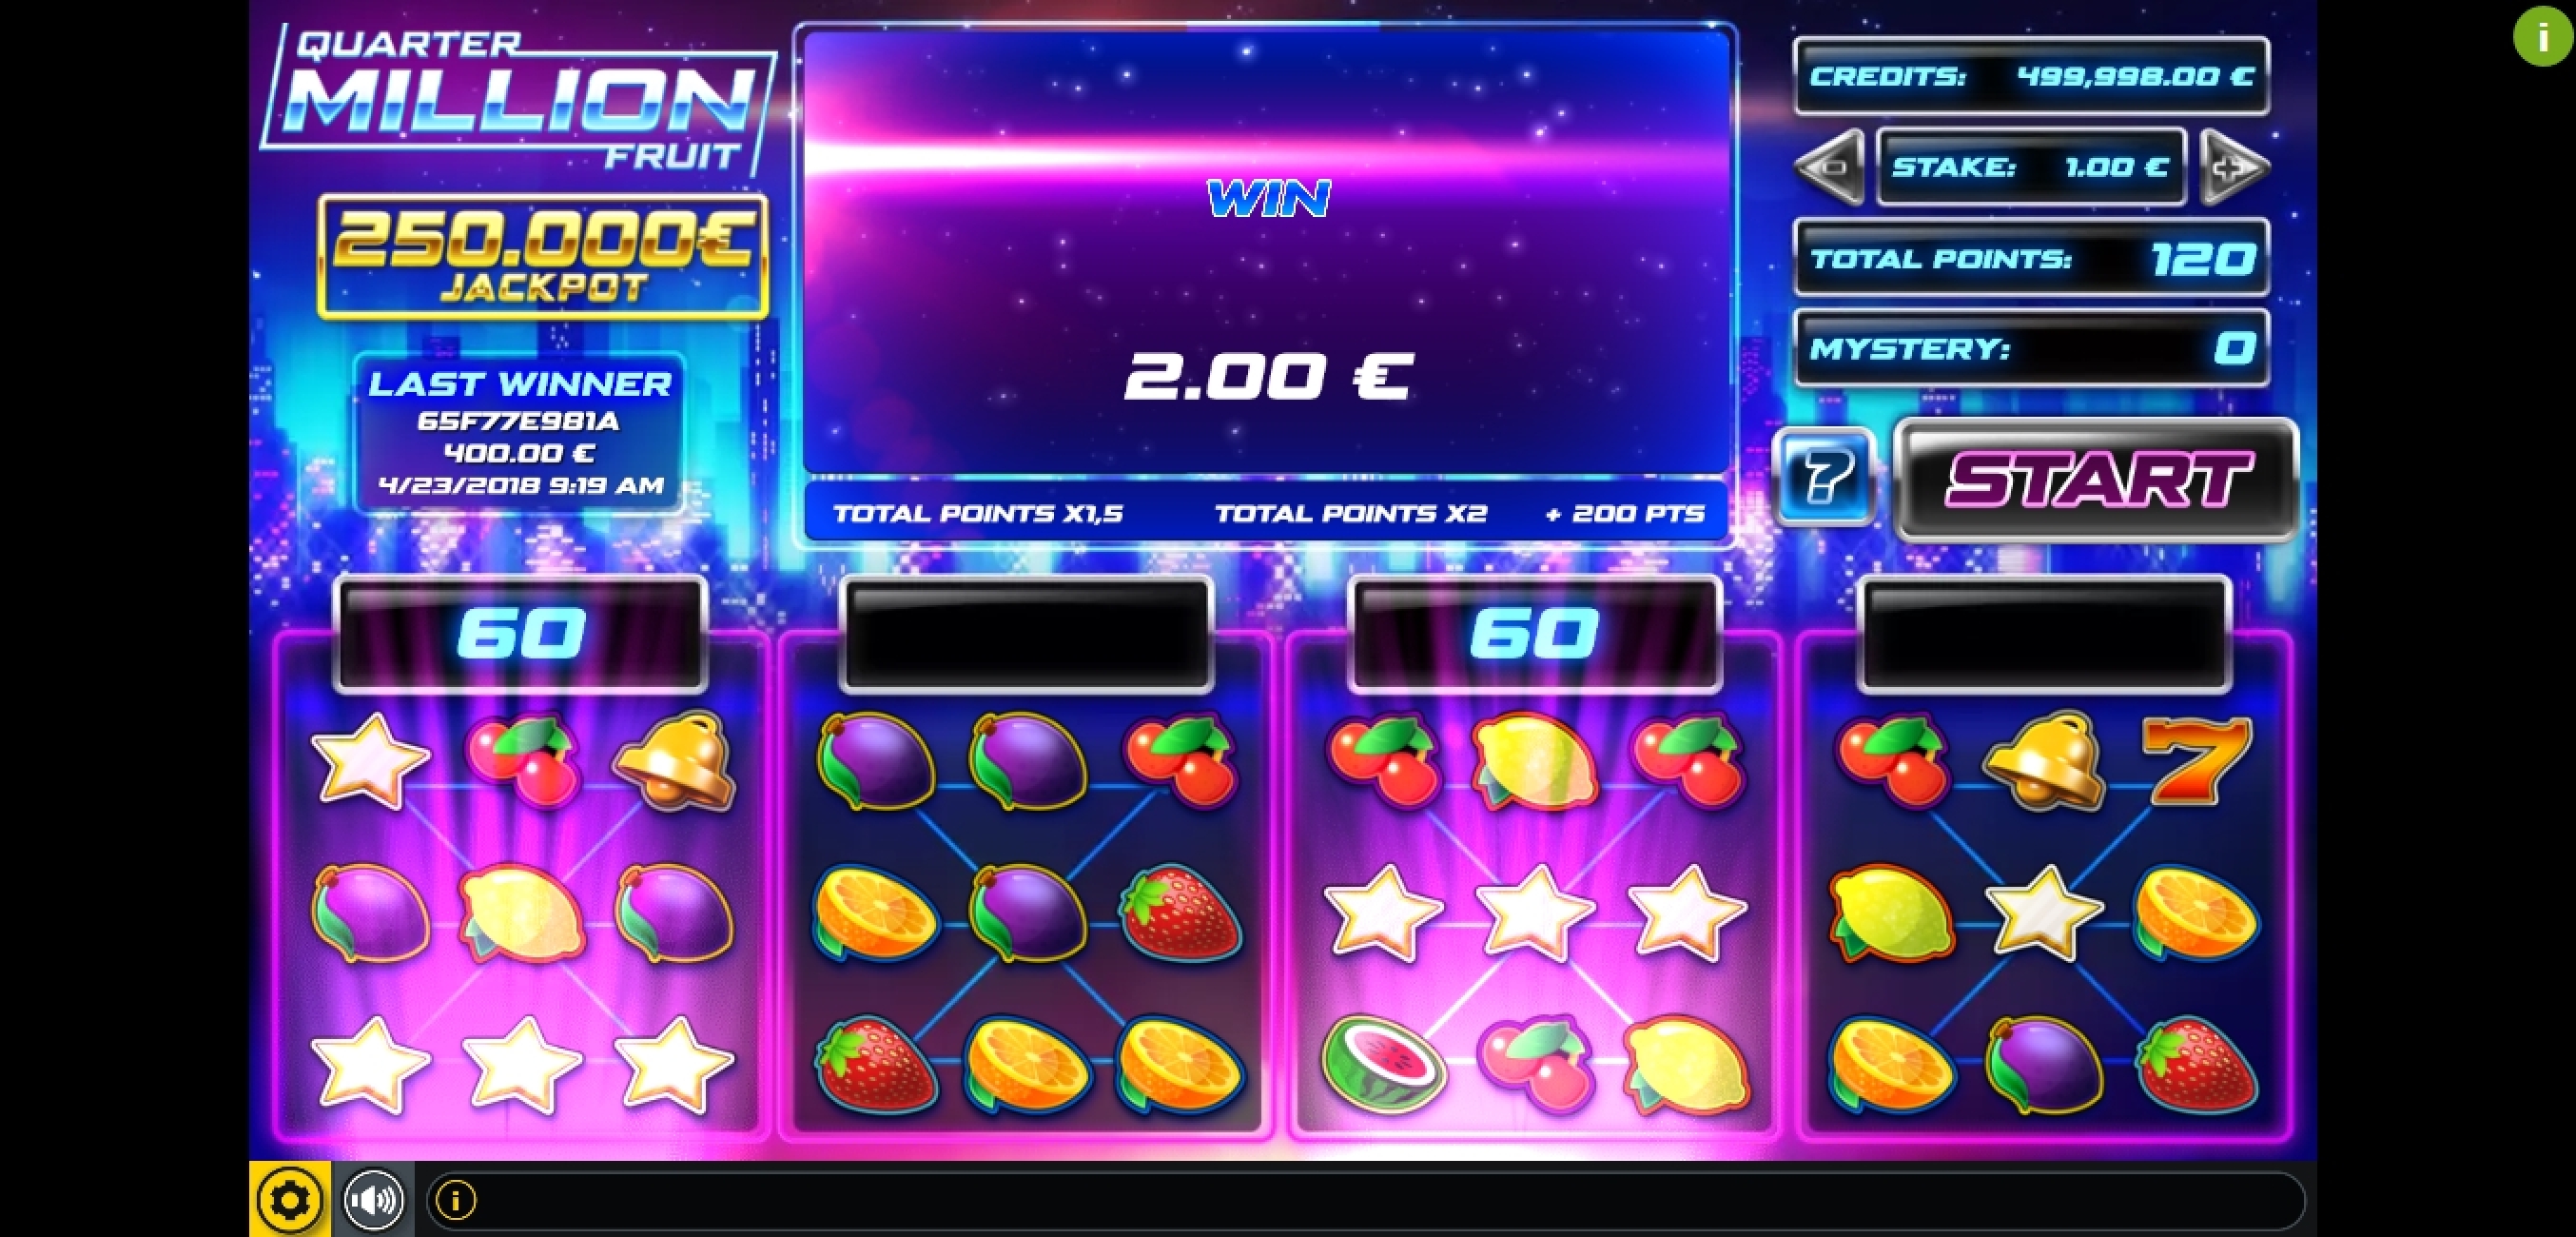 Win Money in Quarter Million Fruit Free Slot Game by GAMING1